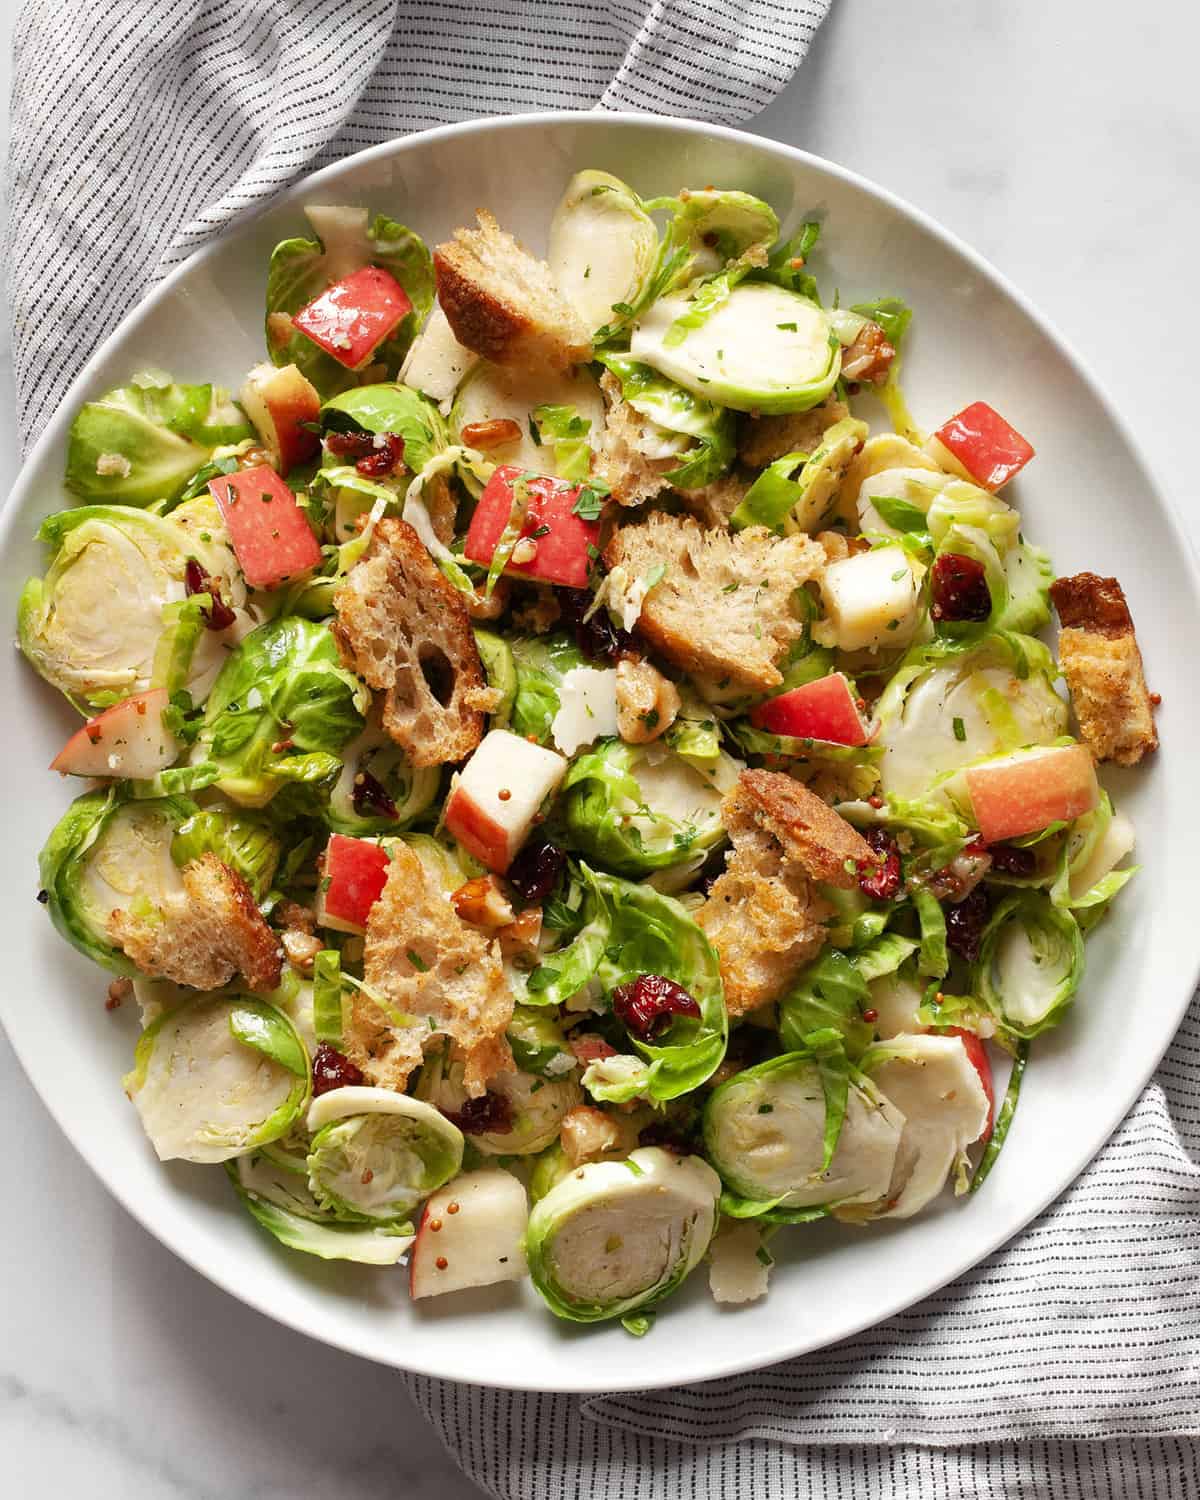 Brussels sprout salad with apples, walnuts, dried cranberries and croutons on a plate.